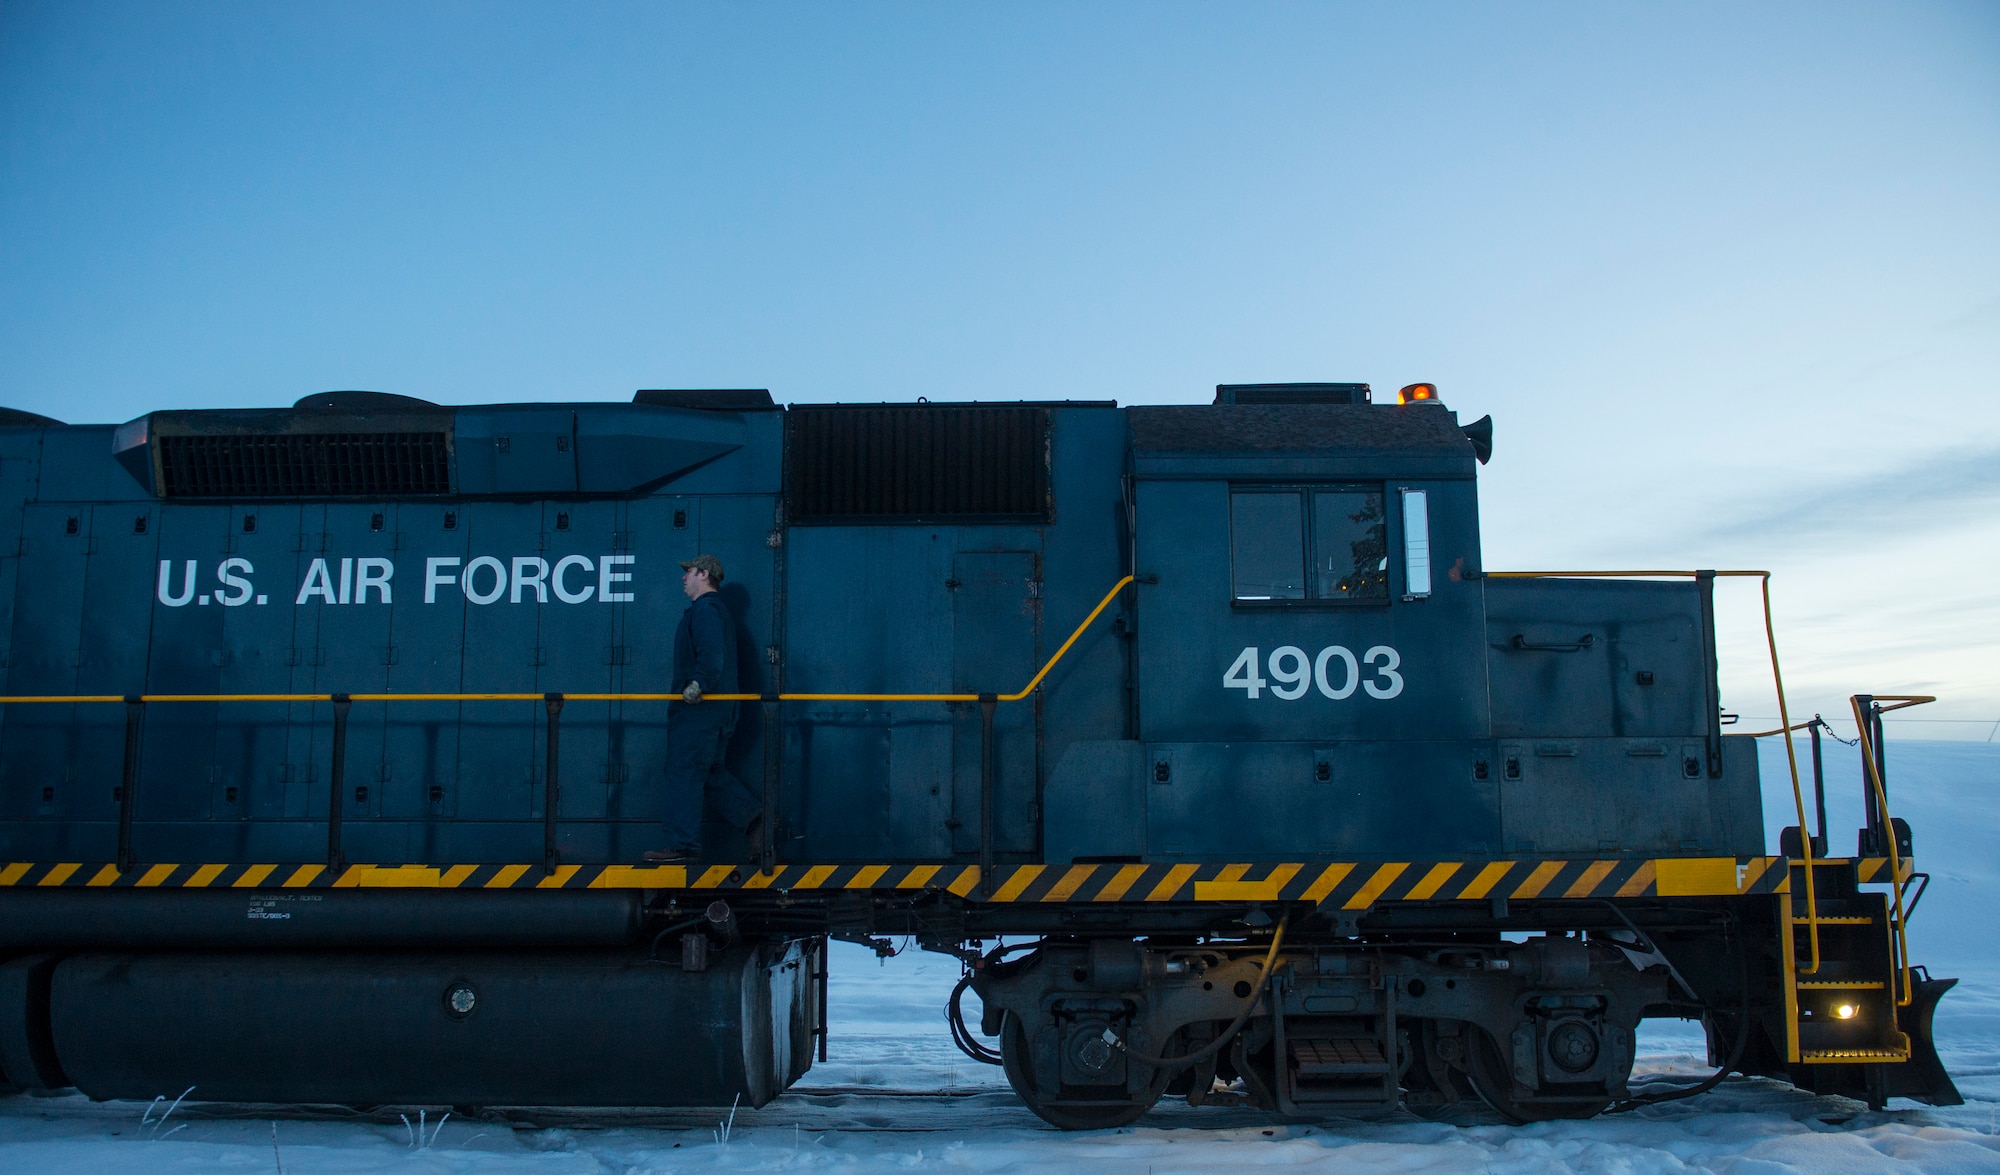 An Air Force locomotive prepares to transport coal to the central heat and power plant at Eielson Air Force Base, Alaska. The locomotive transports 800 tons of coal during the winter months and is the sole source of heat and power for the entire base. (U.S. Air Force photo by/Staff Sgt. Vernon Young Jr.)